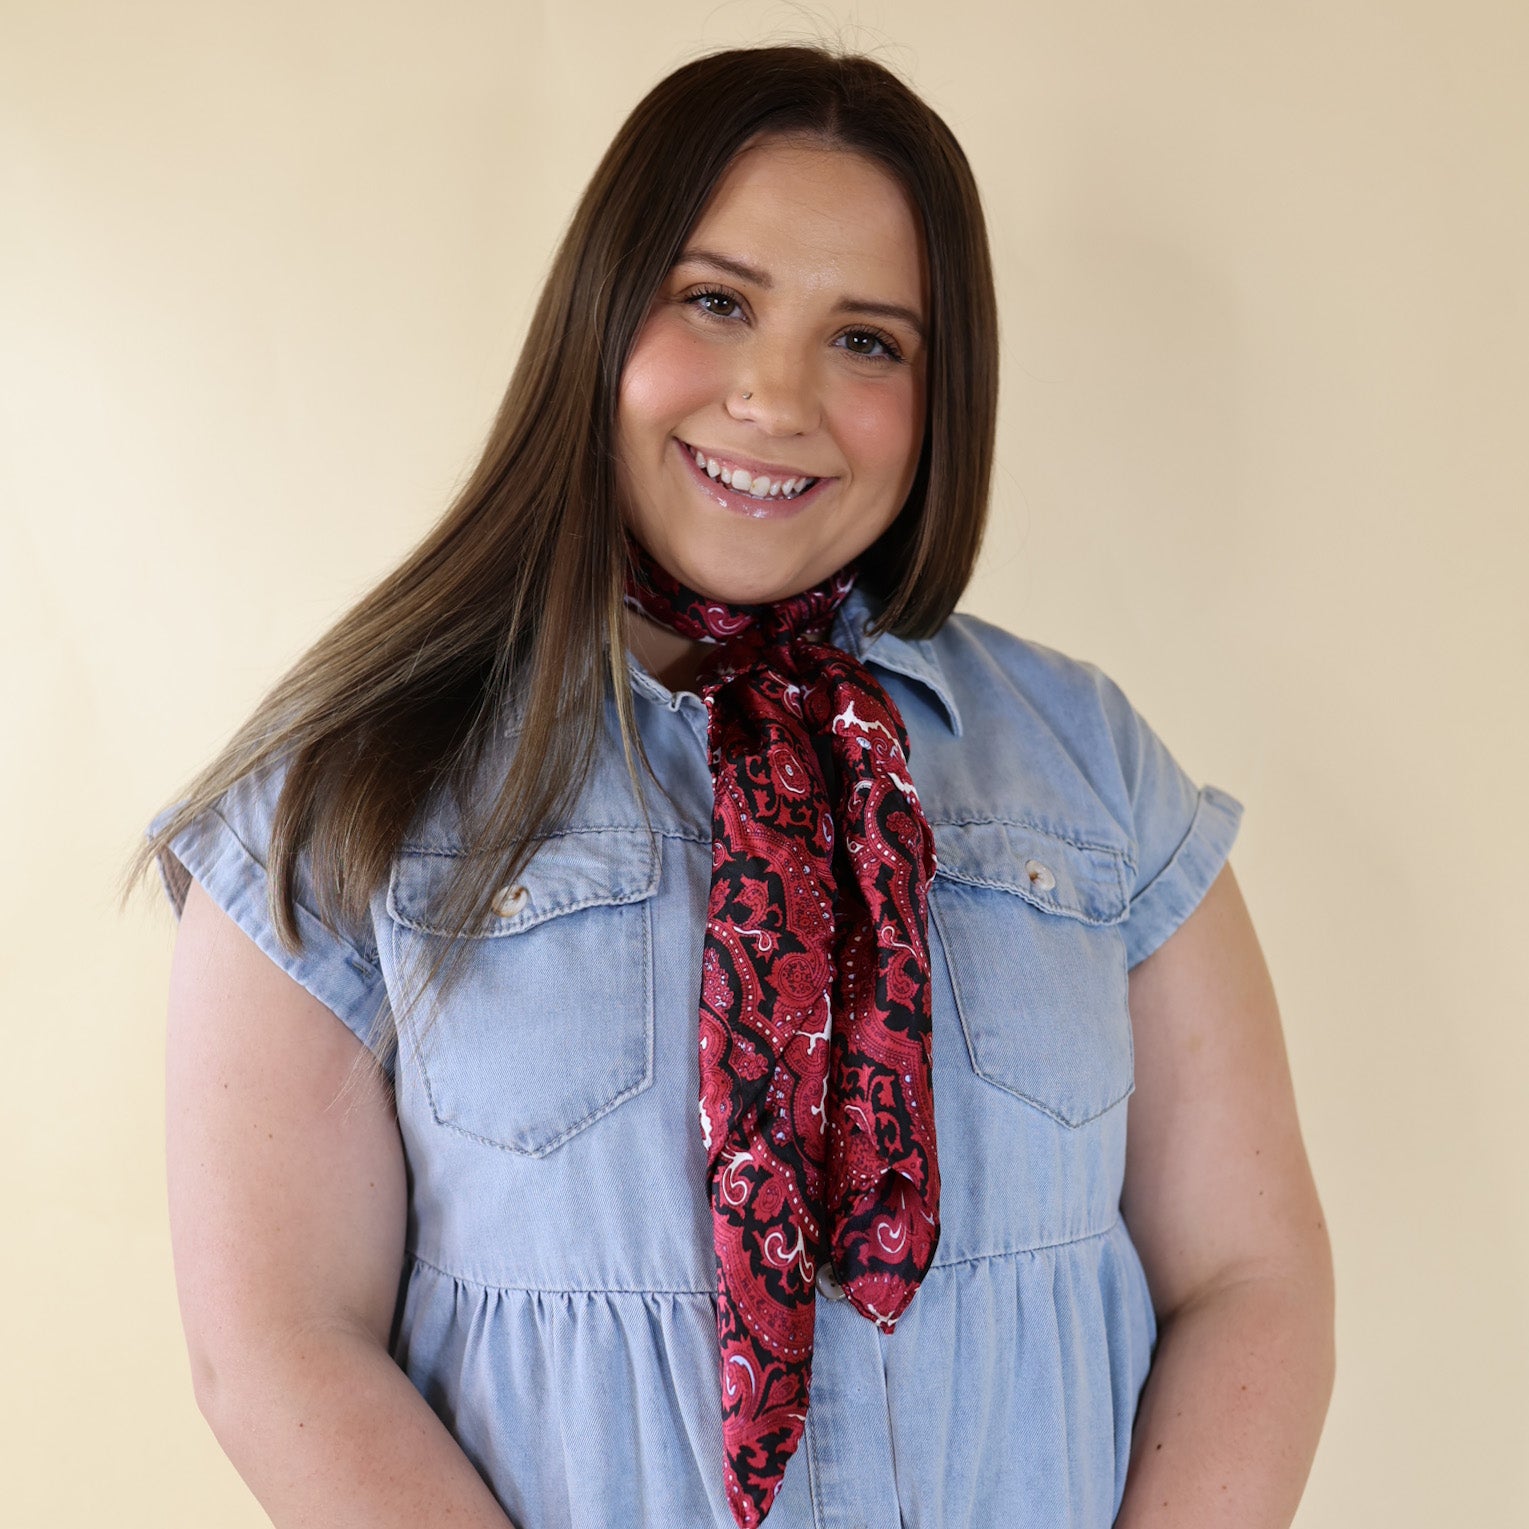 Brunette model wearing a blue dress with Red and Black Paisley print scarf tied around her neck. Model is pictured in front of a beige background.